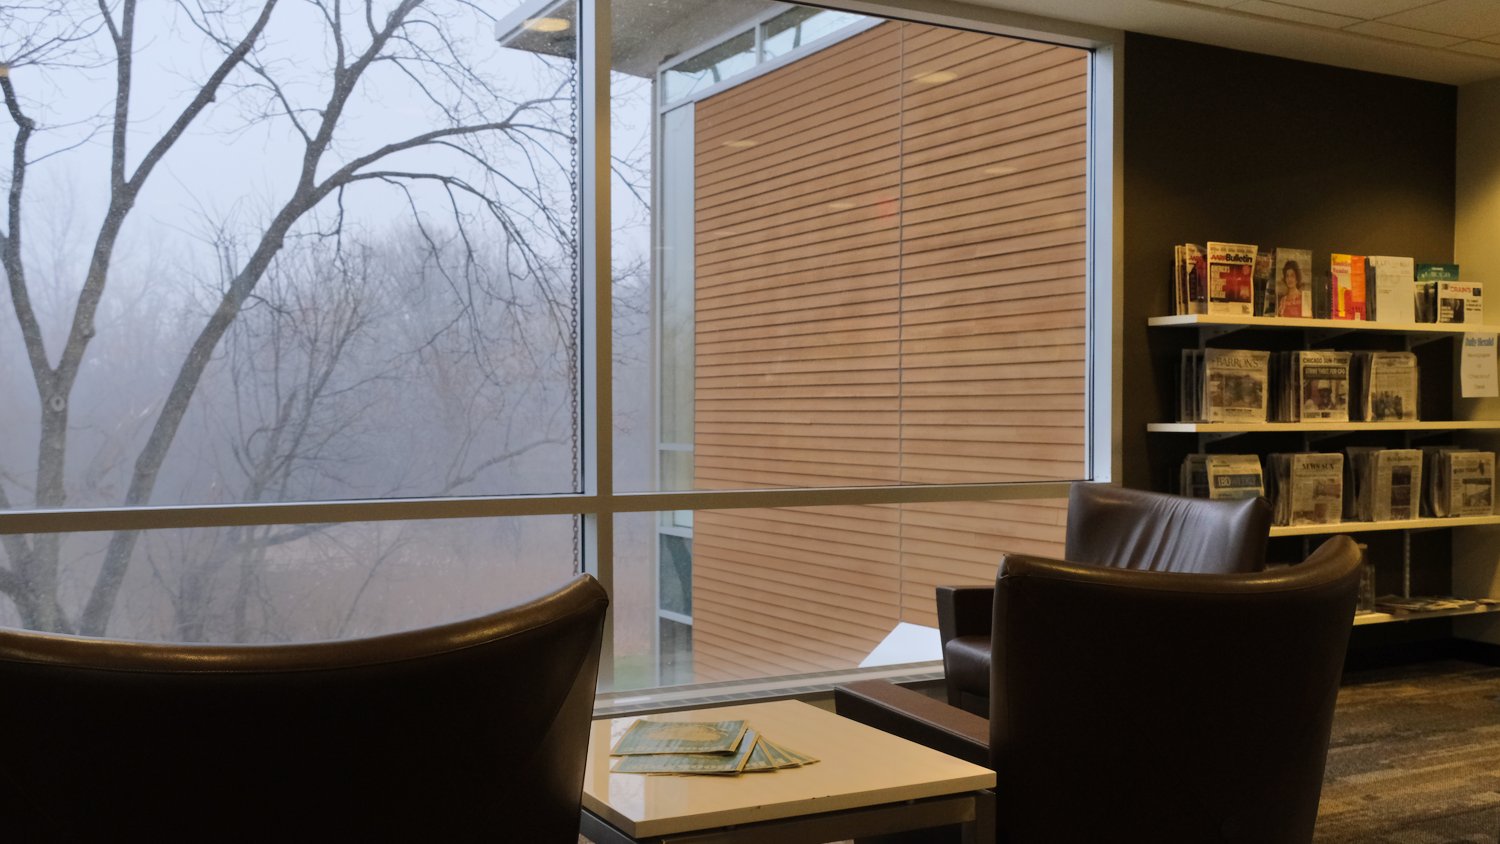 Magazine and periodicals area also serves up large views of the changing seasons.